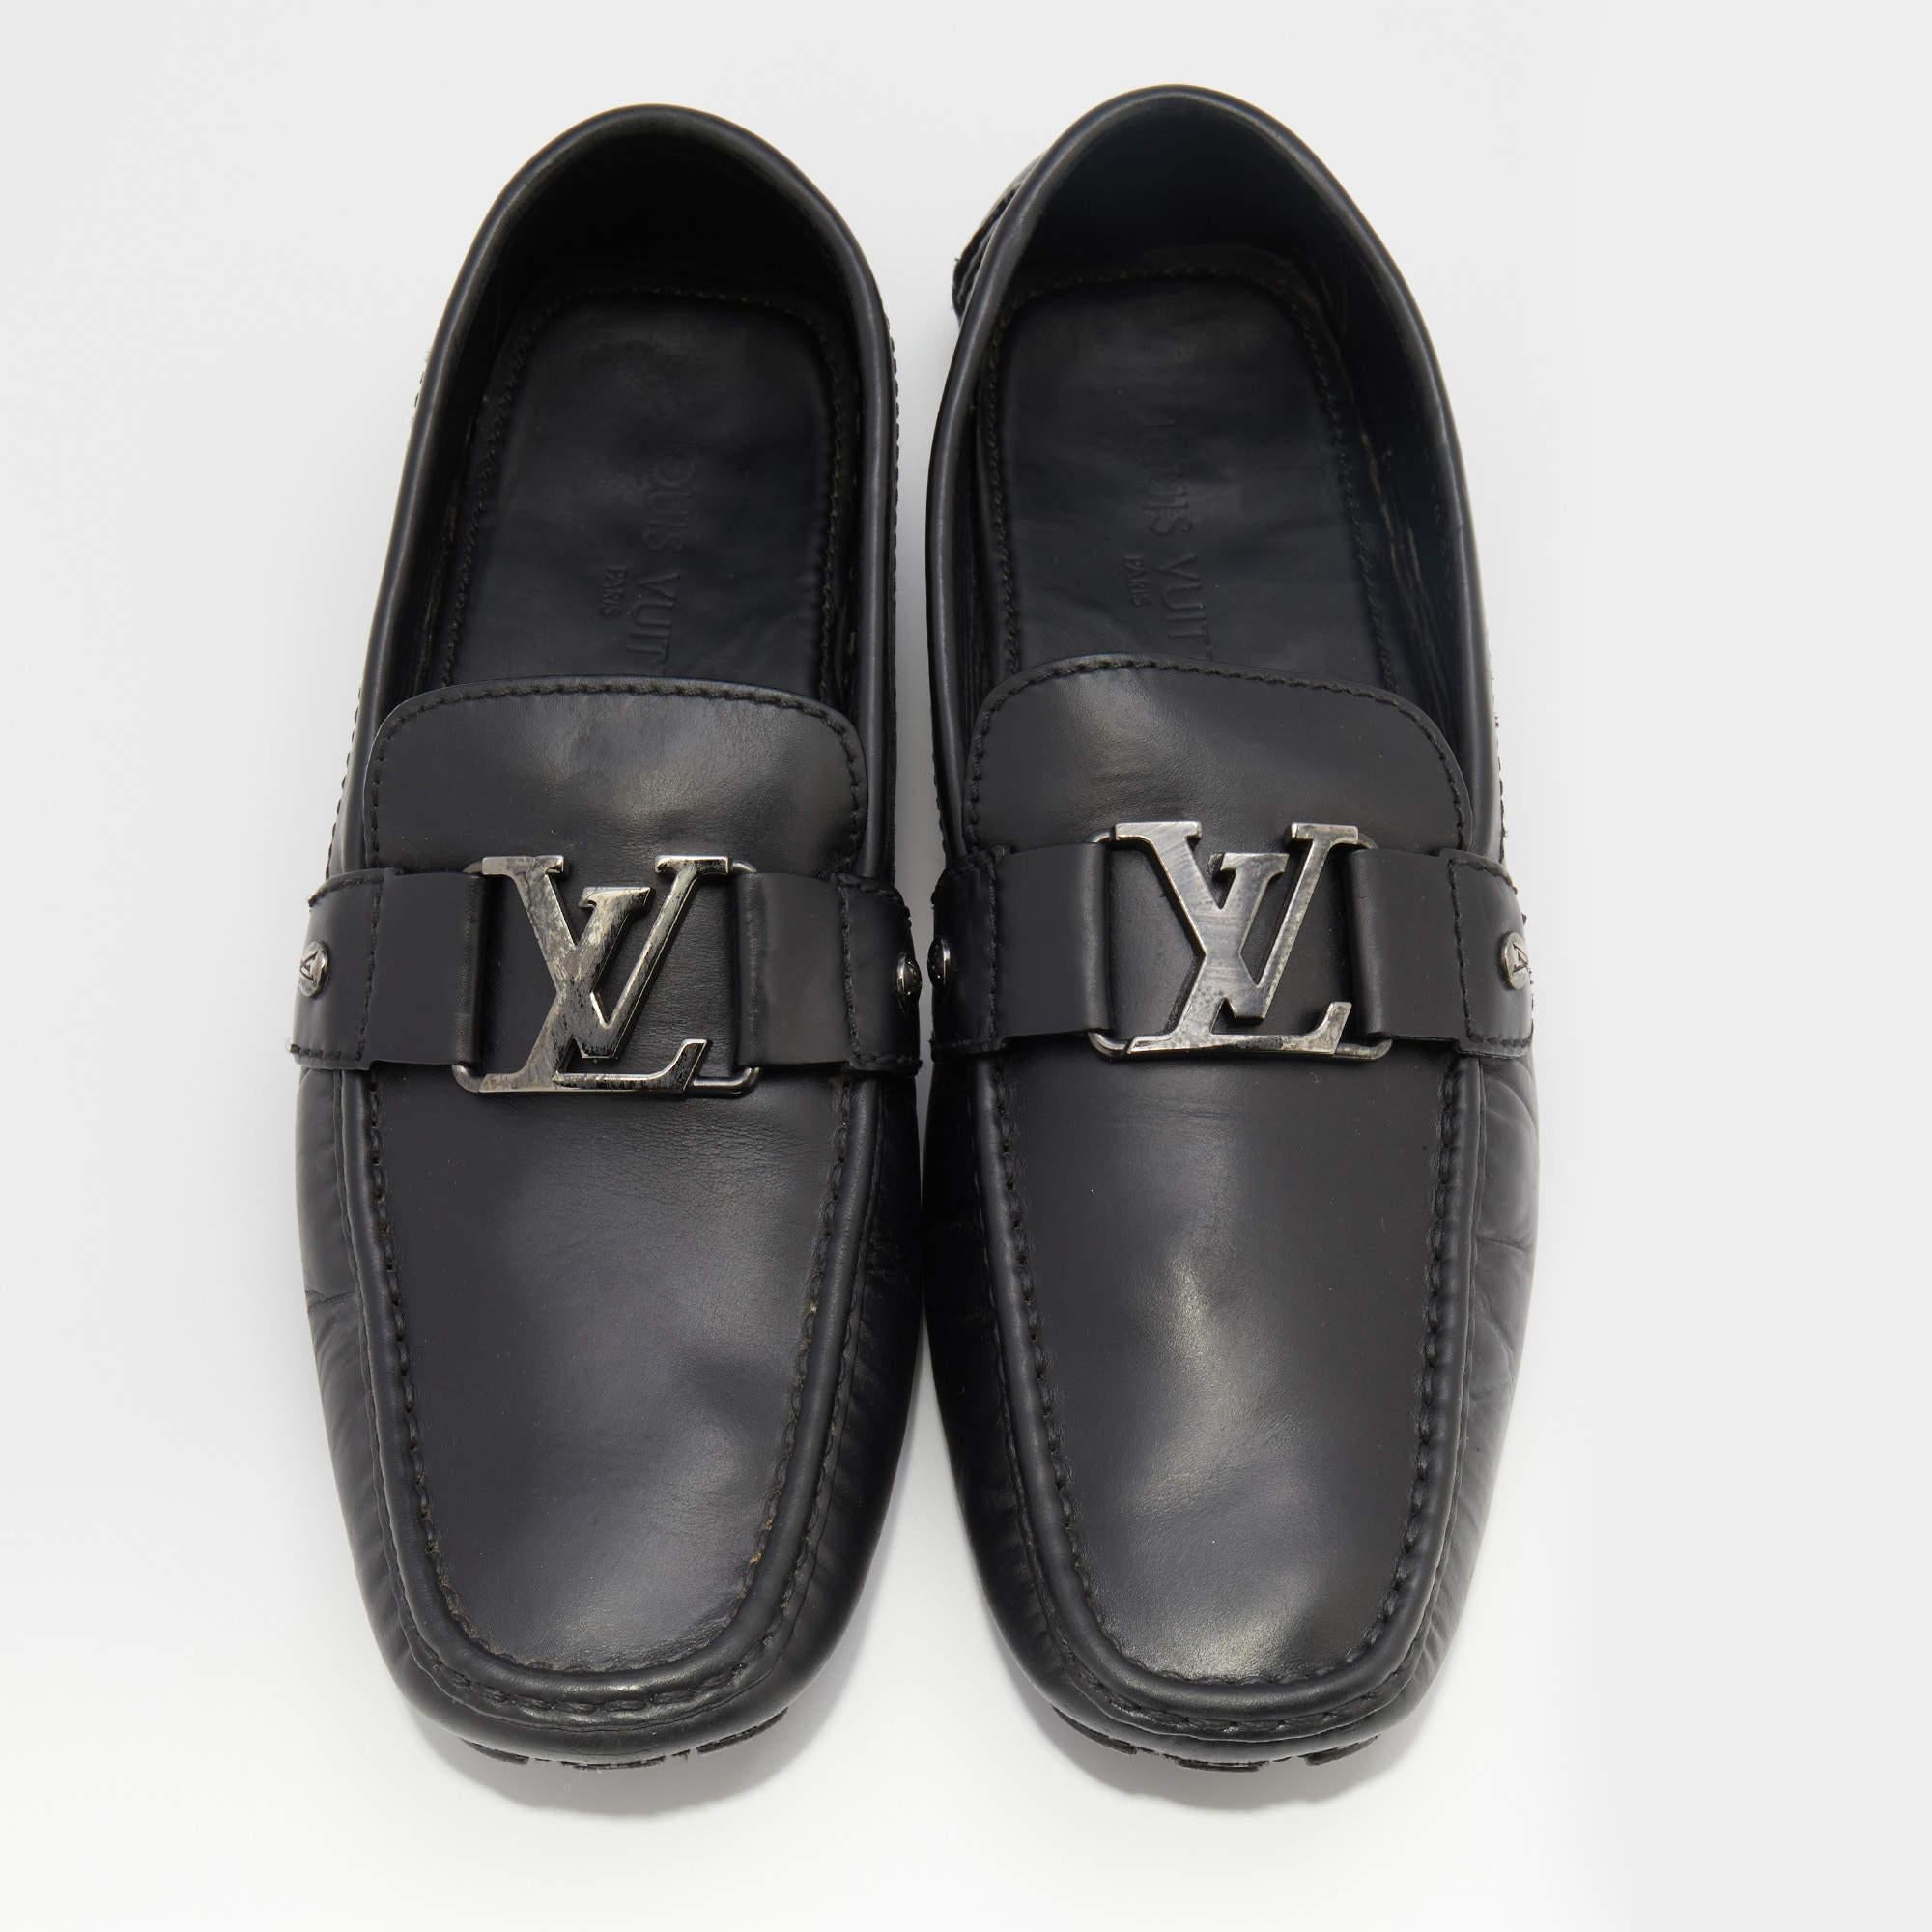 These loafers are durable and classy. Created from quality materials, it features relaxing footbeds and will lend you optimal grip while walking.

